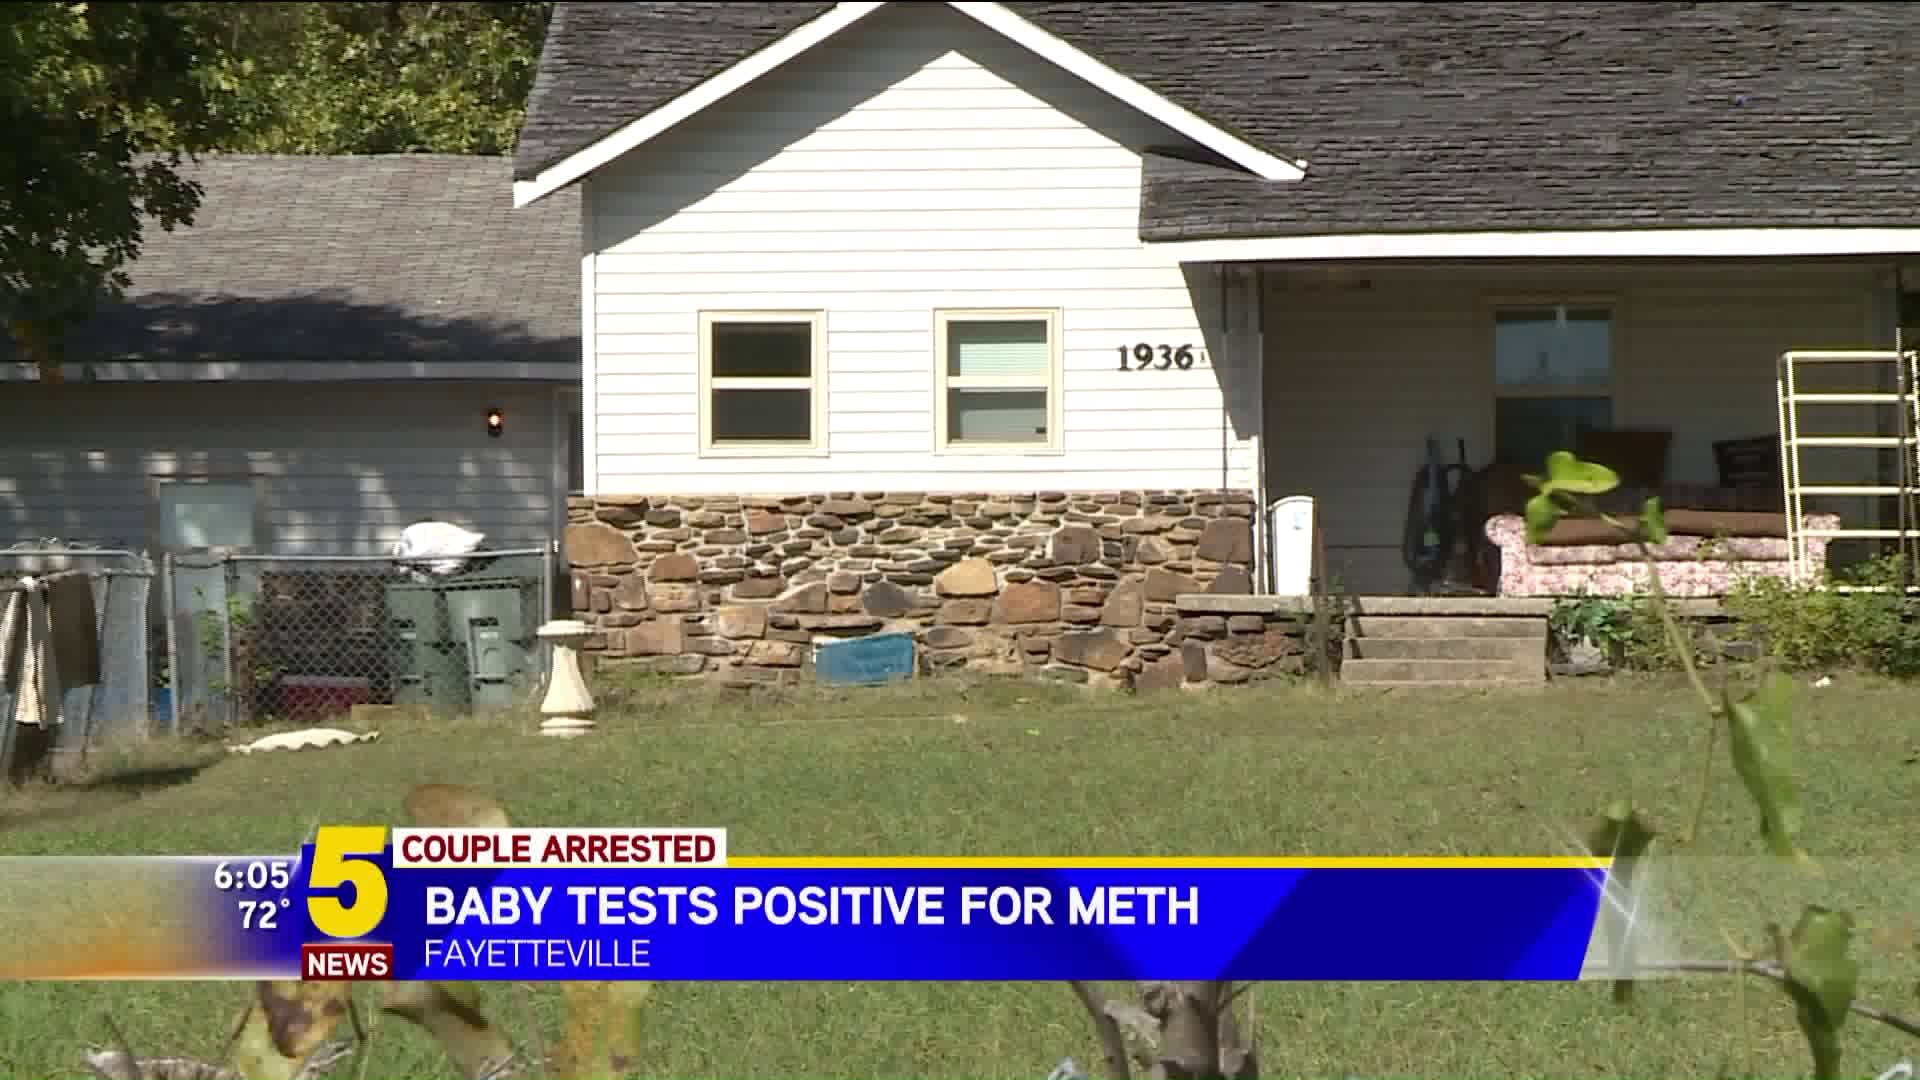 Baby Tests Positive For Meth